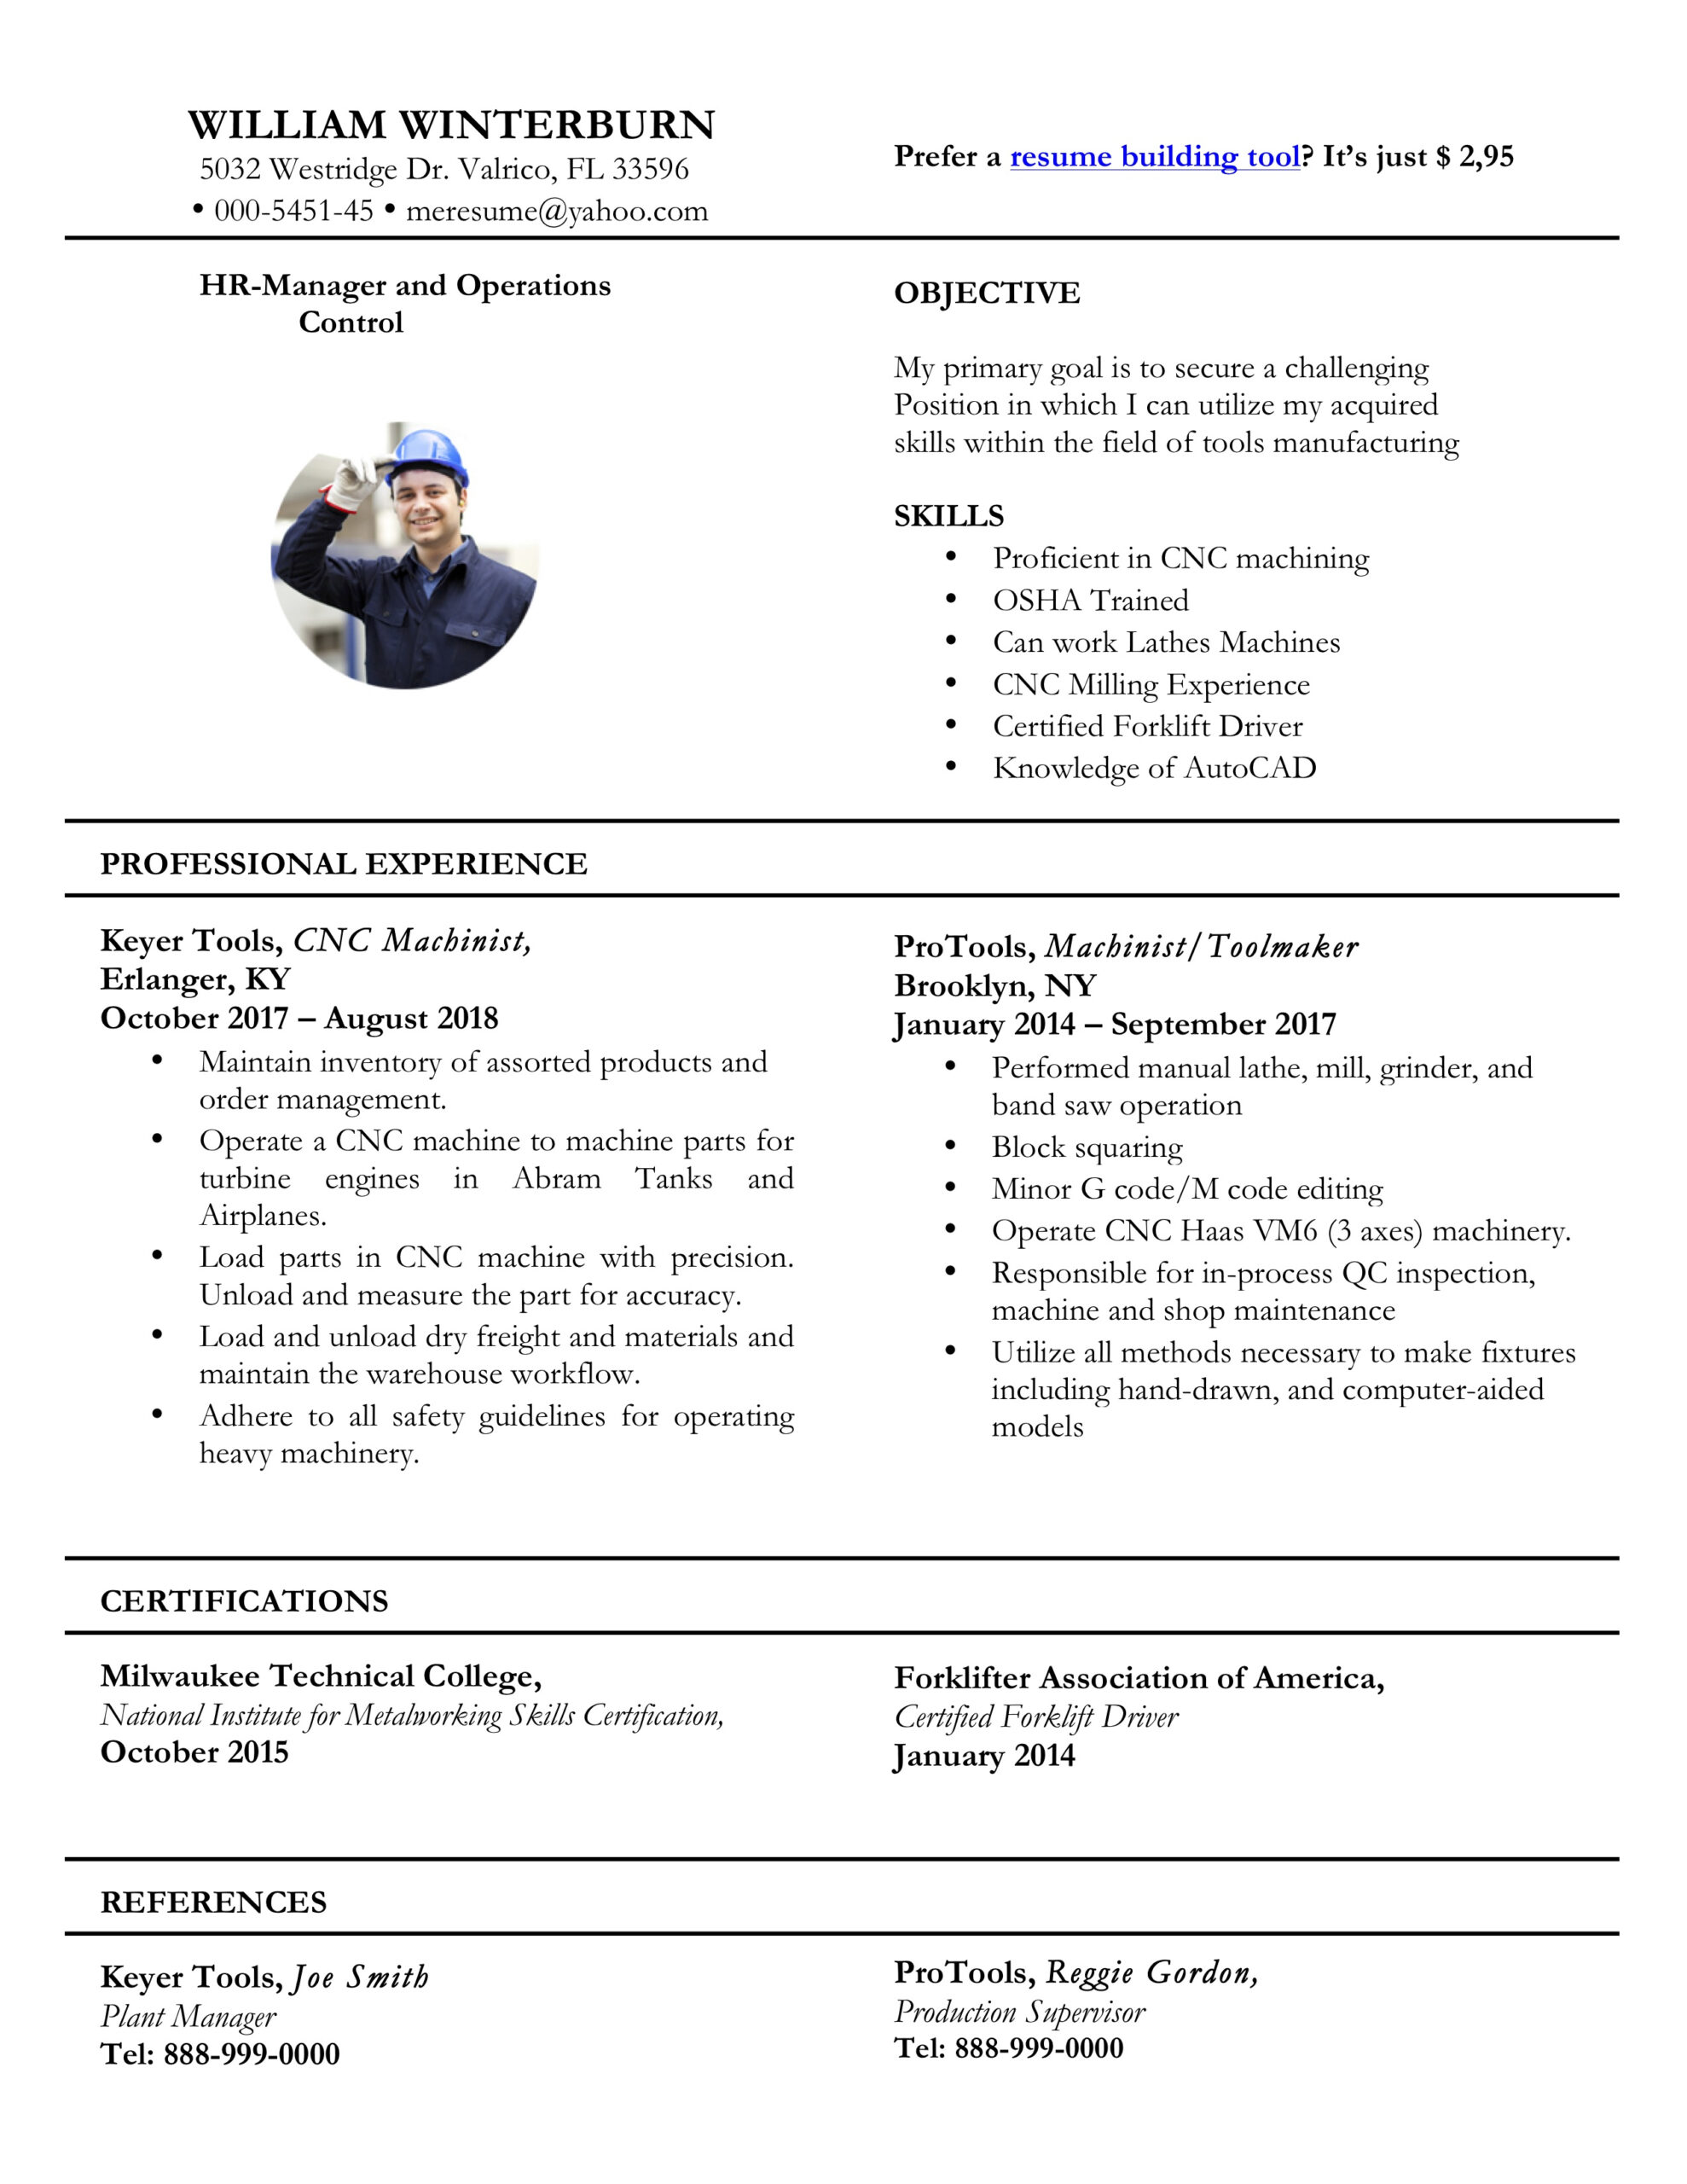 Resume Templates [2020] | Pdf And Word | Free Downloads + With Regard To Microsoft Word Resumes Templates